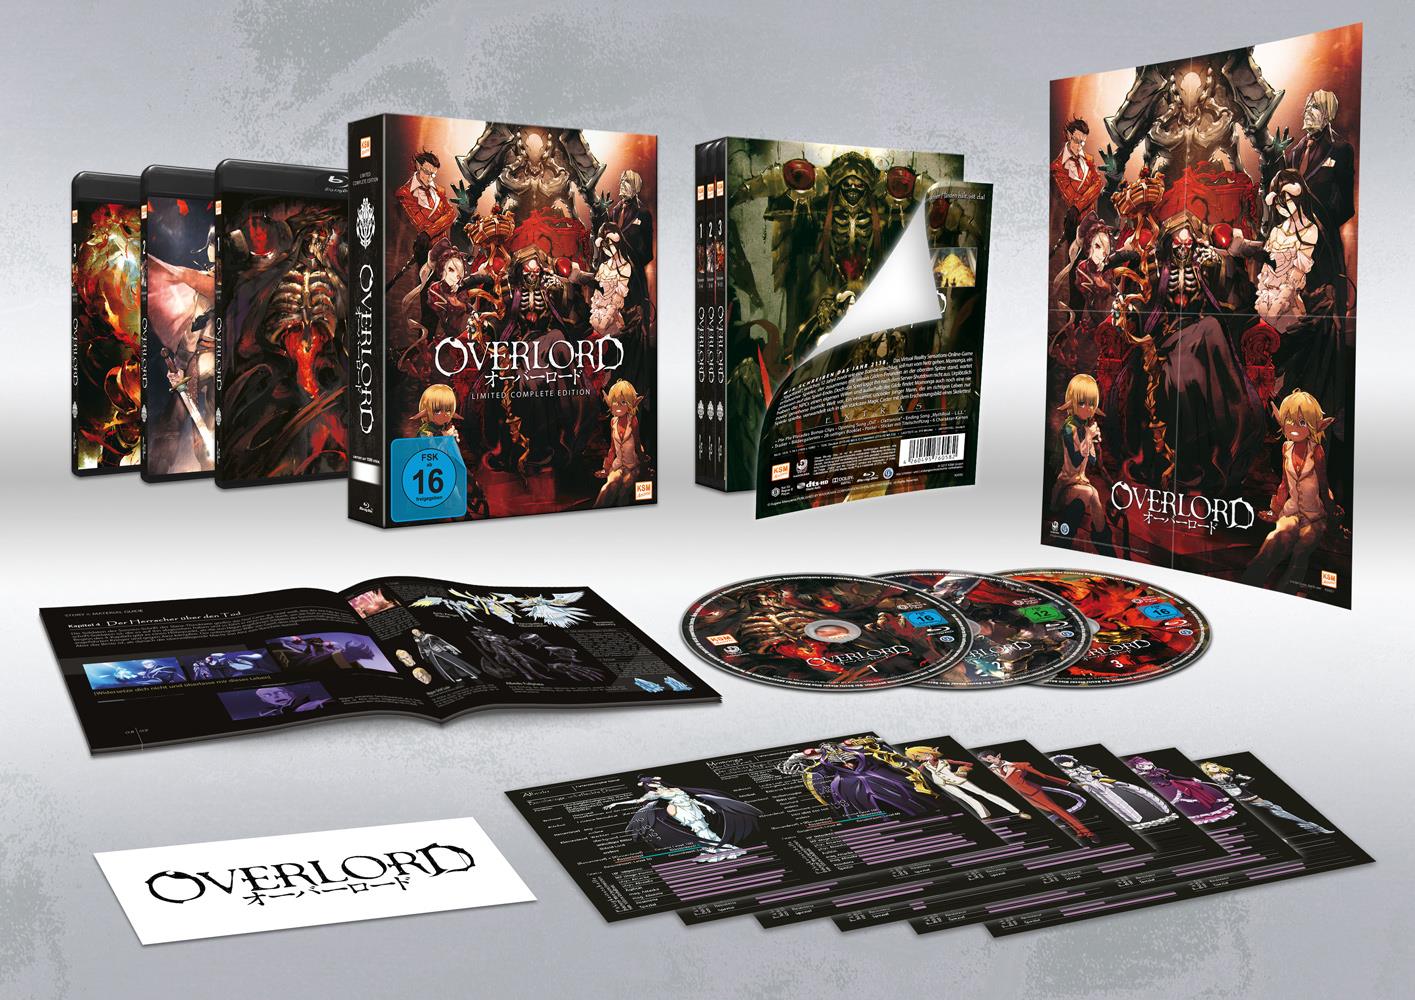 Overlord-Limited-Complete-Edition-Overview.jpg